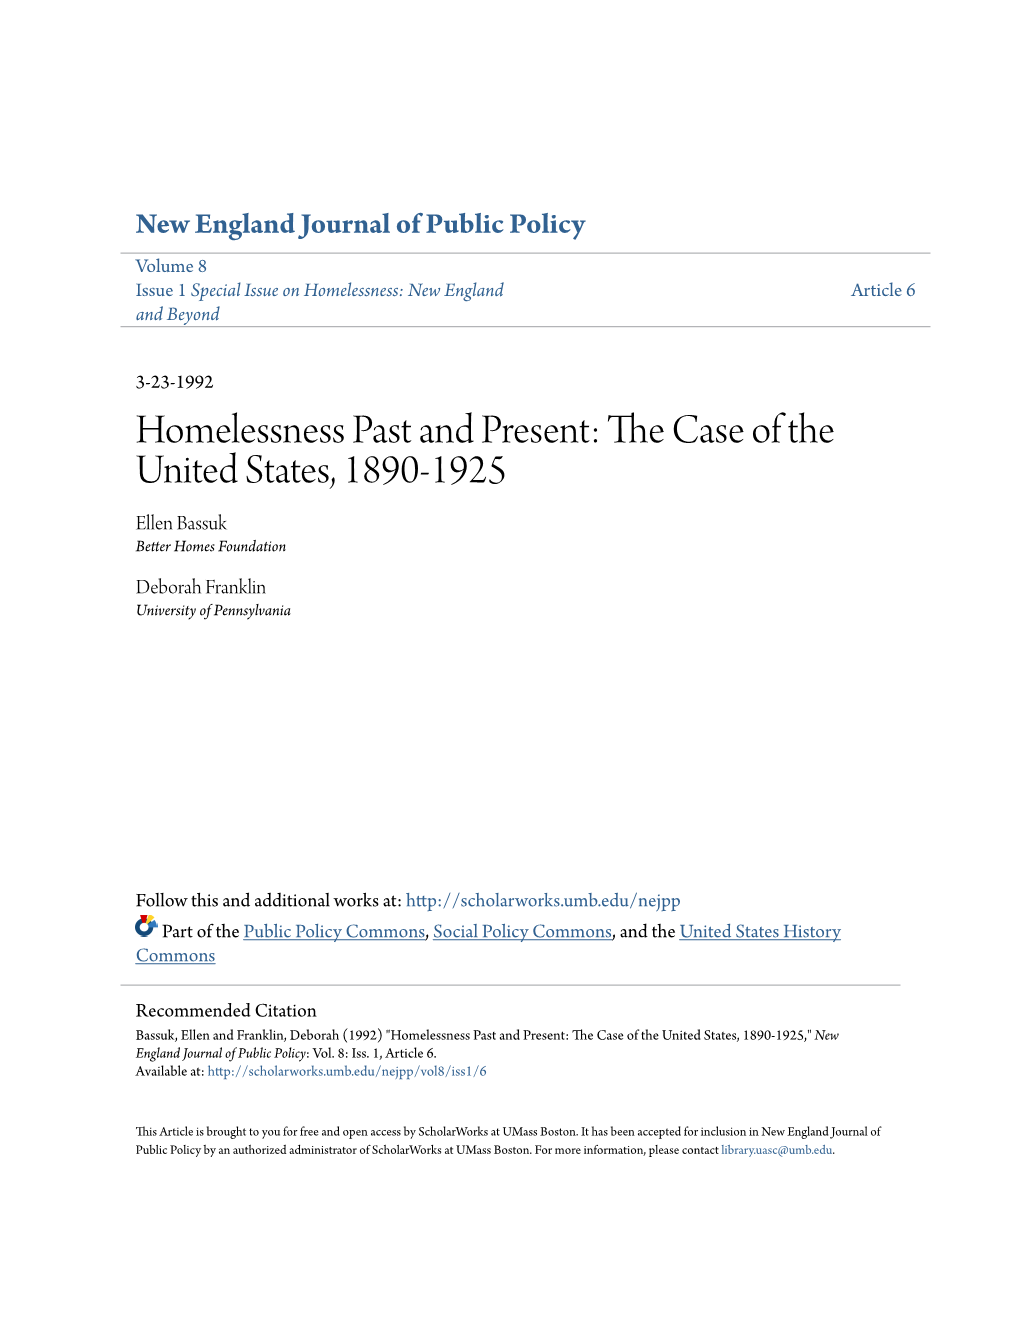 Homelessness Past and Present: the Case of the United States, 1890-1925